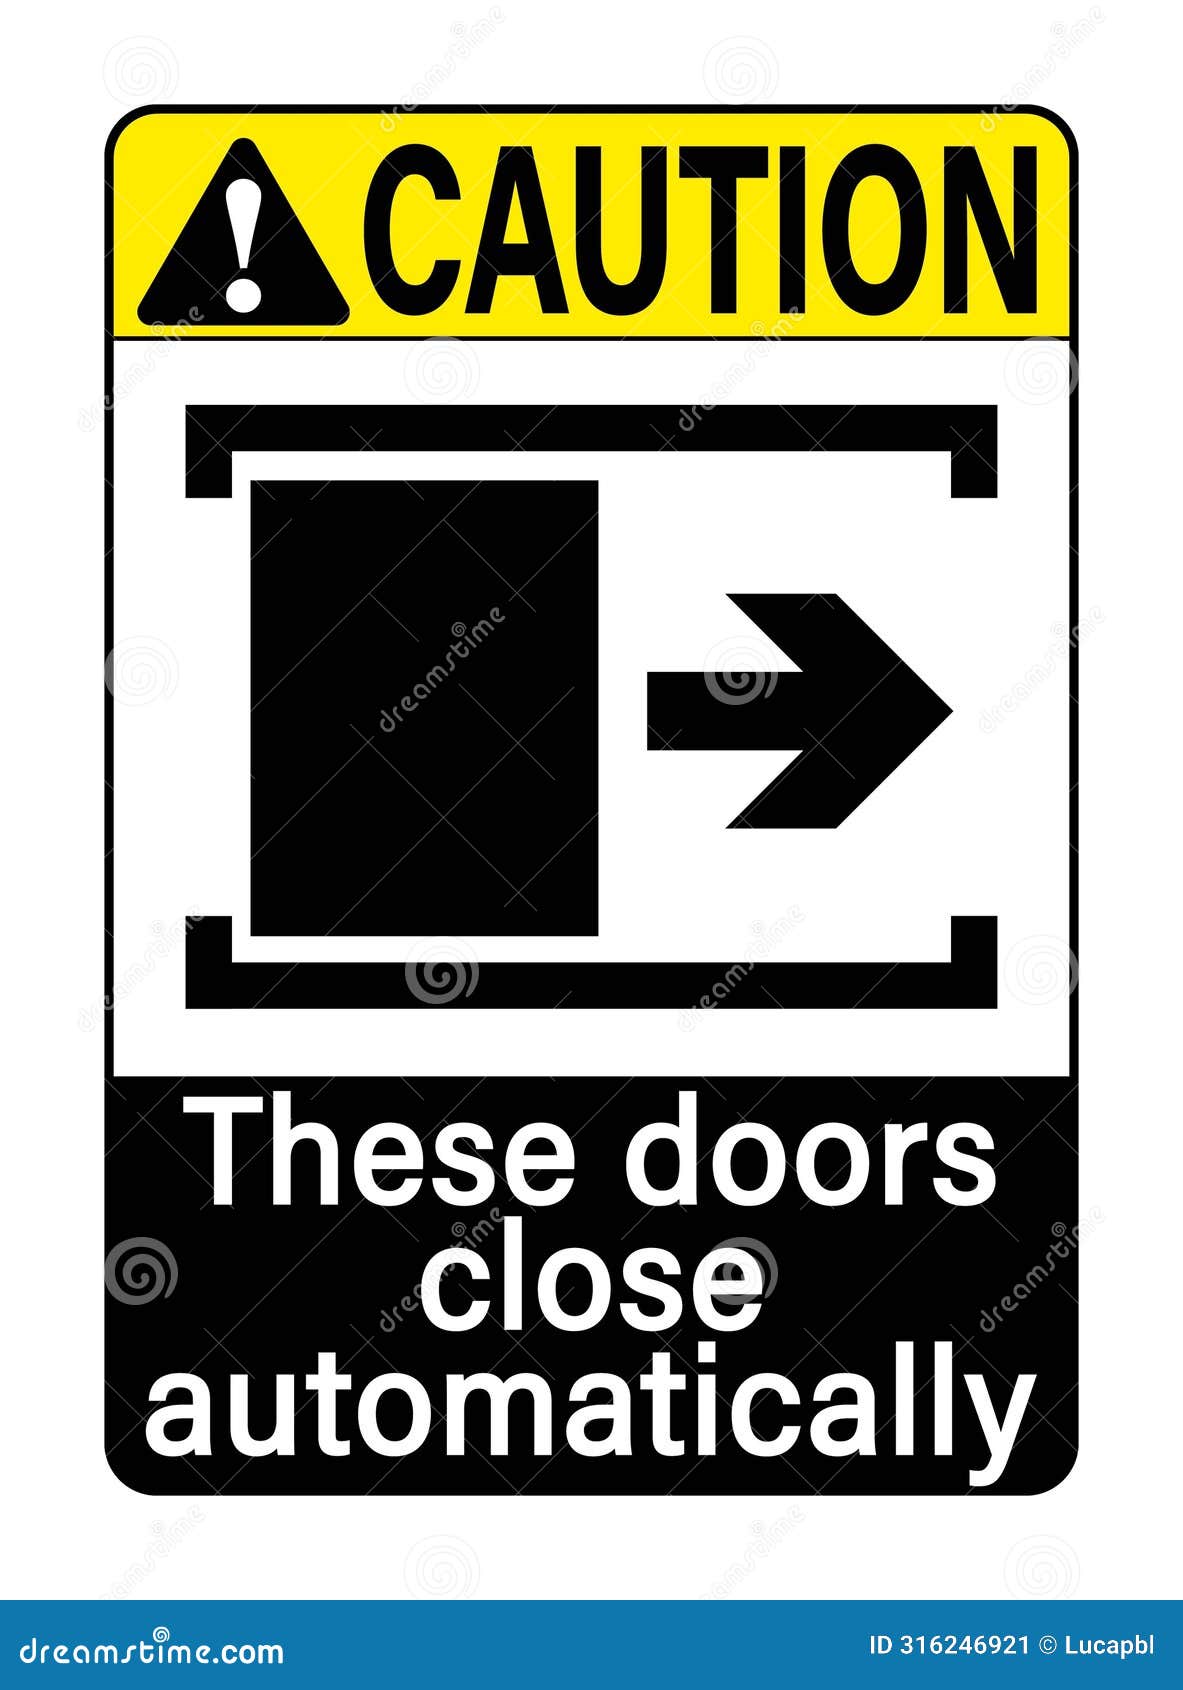 caution these doors close automatically. warning sign with  and text